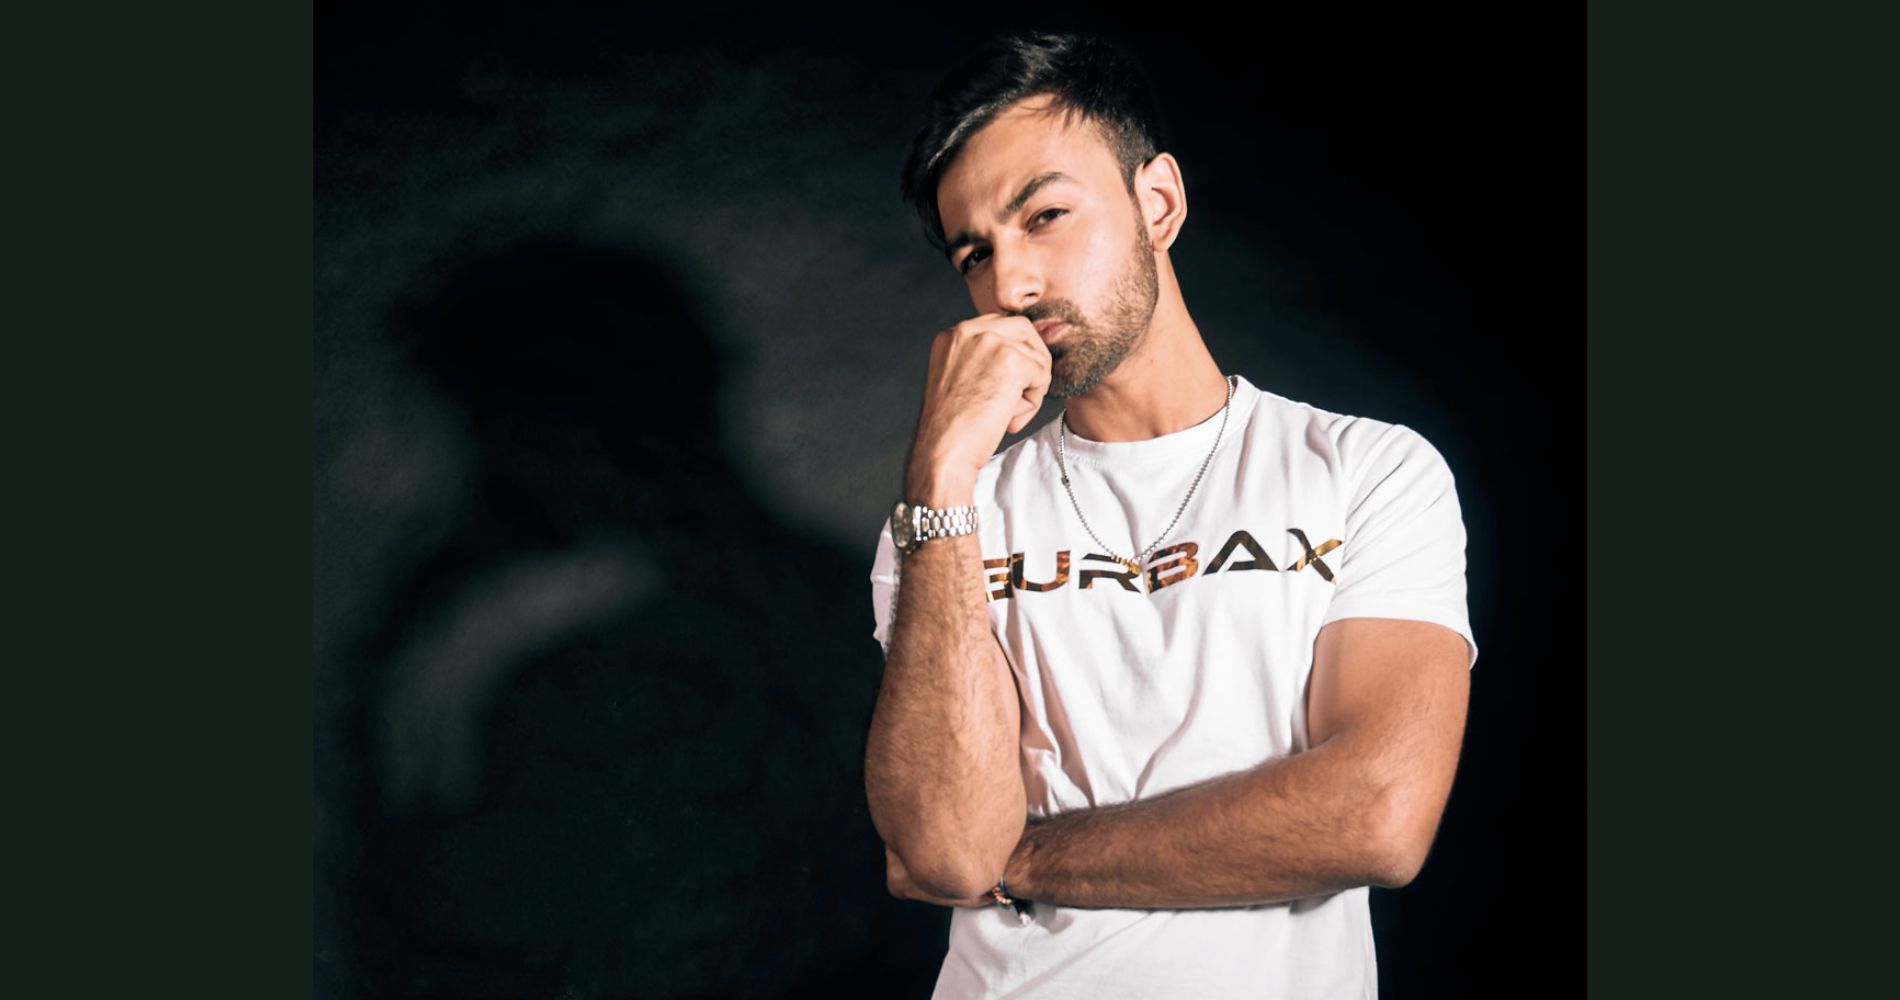 "You can't call yourself a musician until you’ve released an Album”-DJ Kunaal Gurbaxani